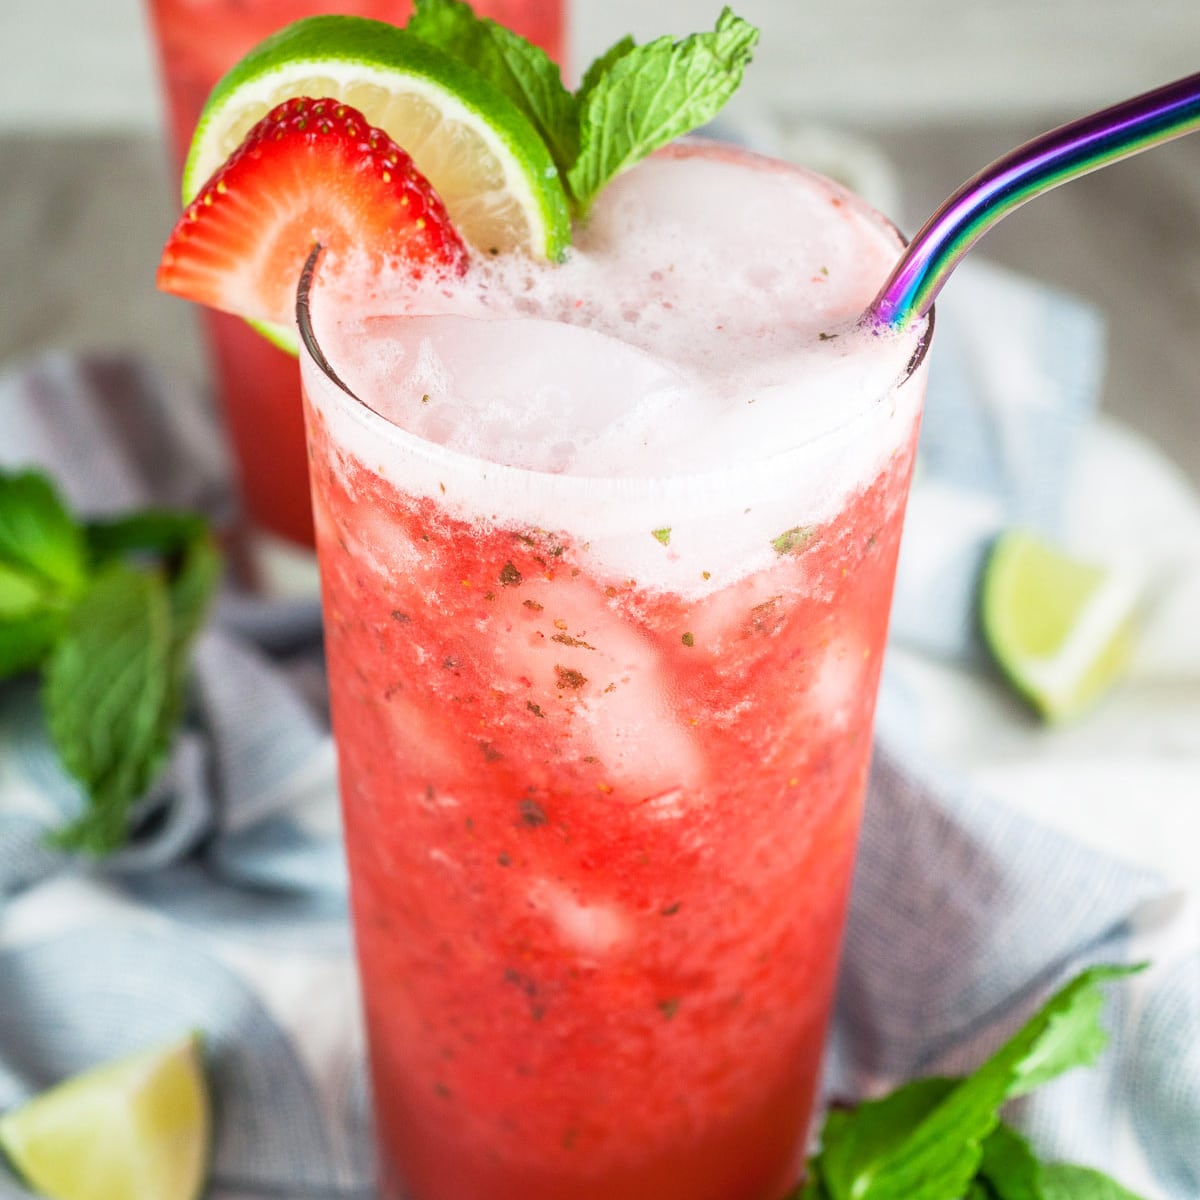 https://www.therusticfoodie.com/wp-content/uploads/2021/06/Virgin-Strawberry-Mojitos-featured.jpg